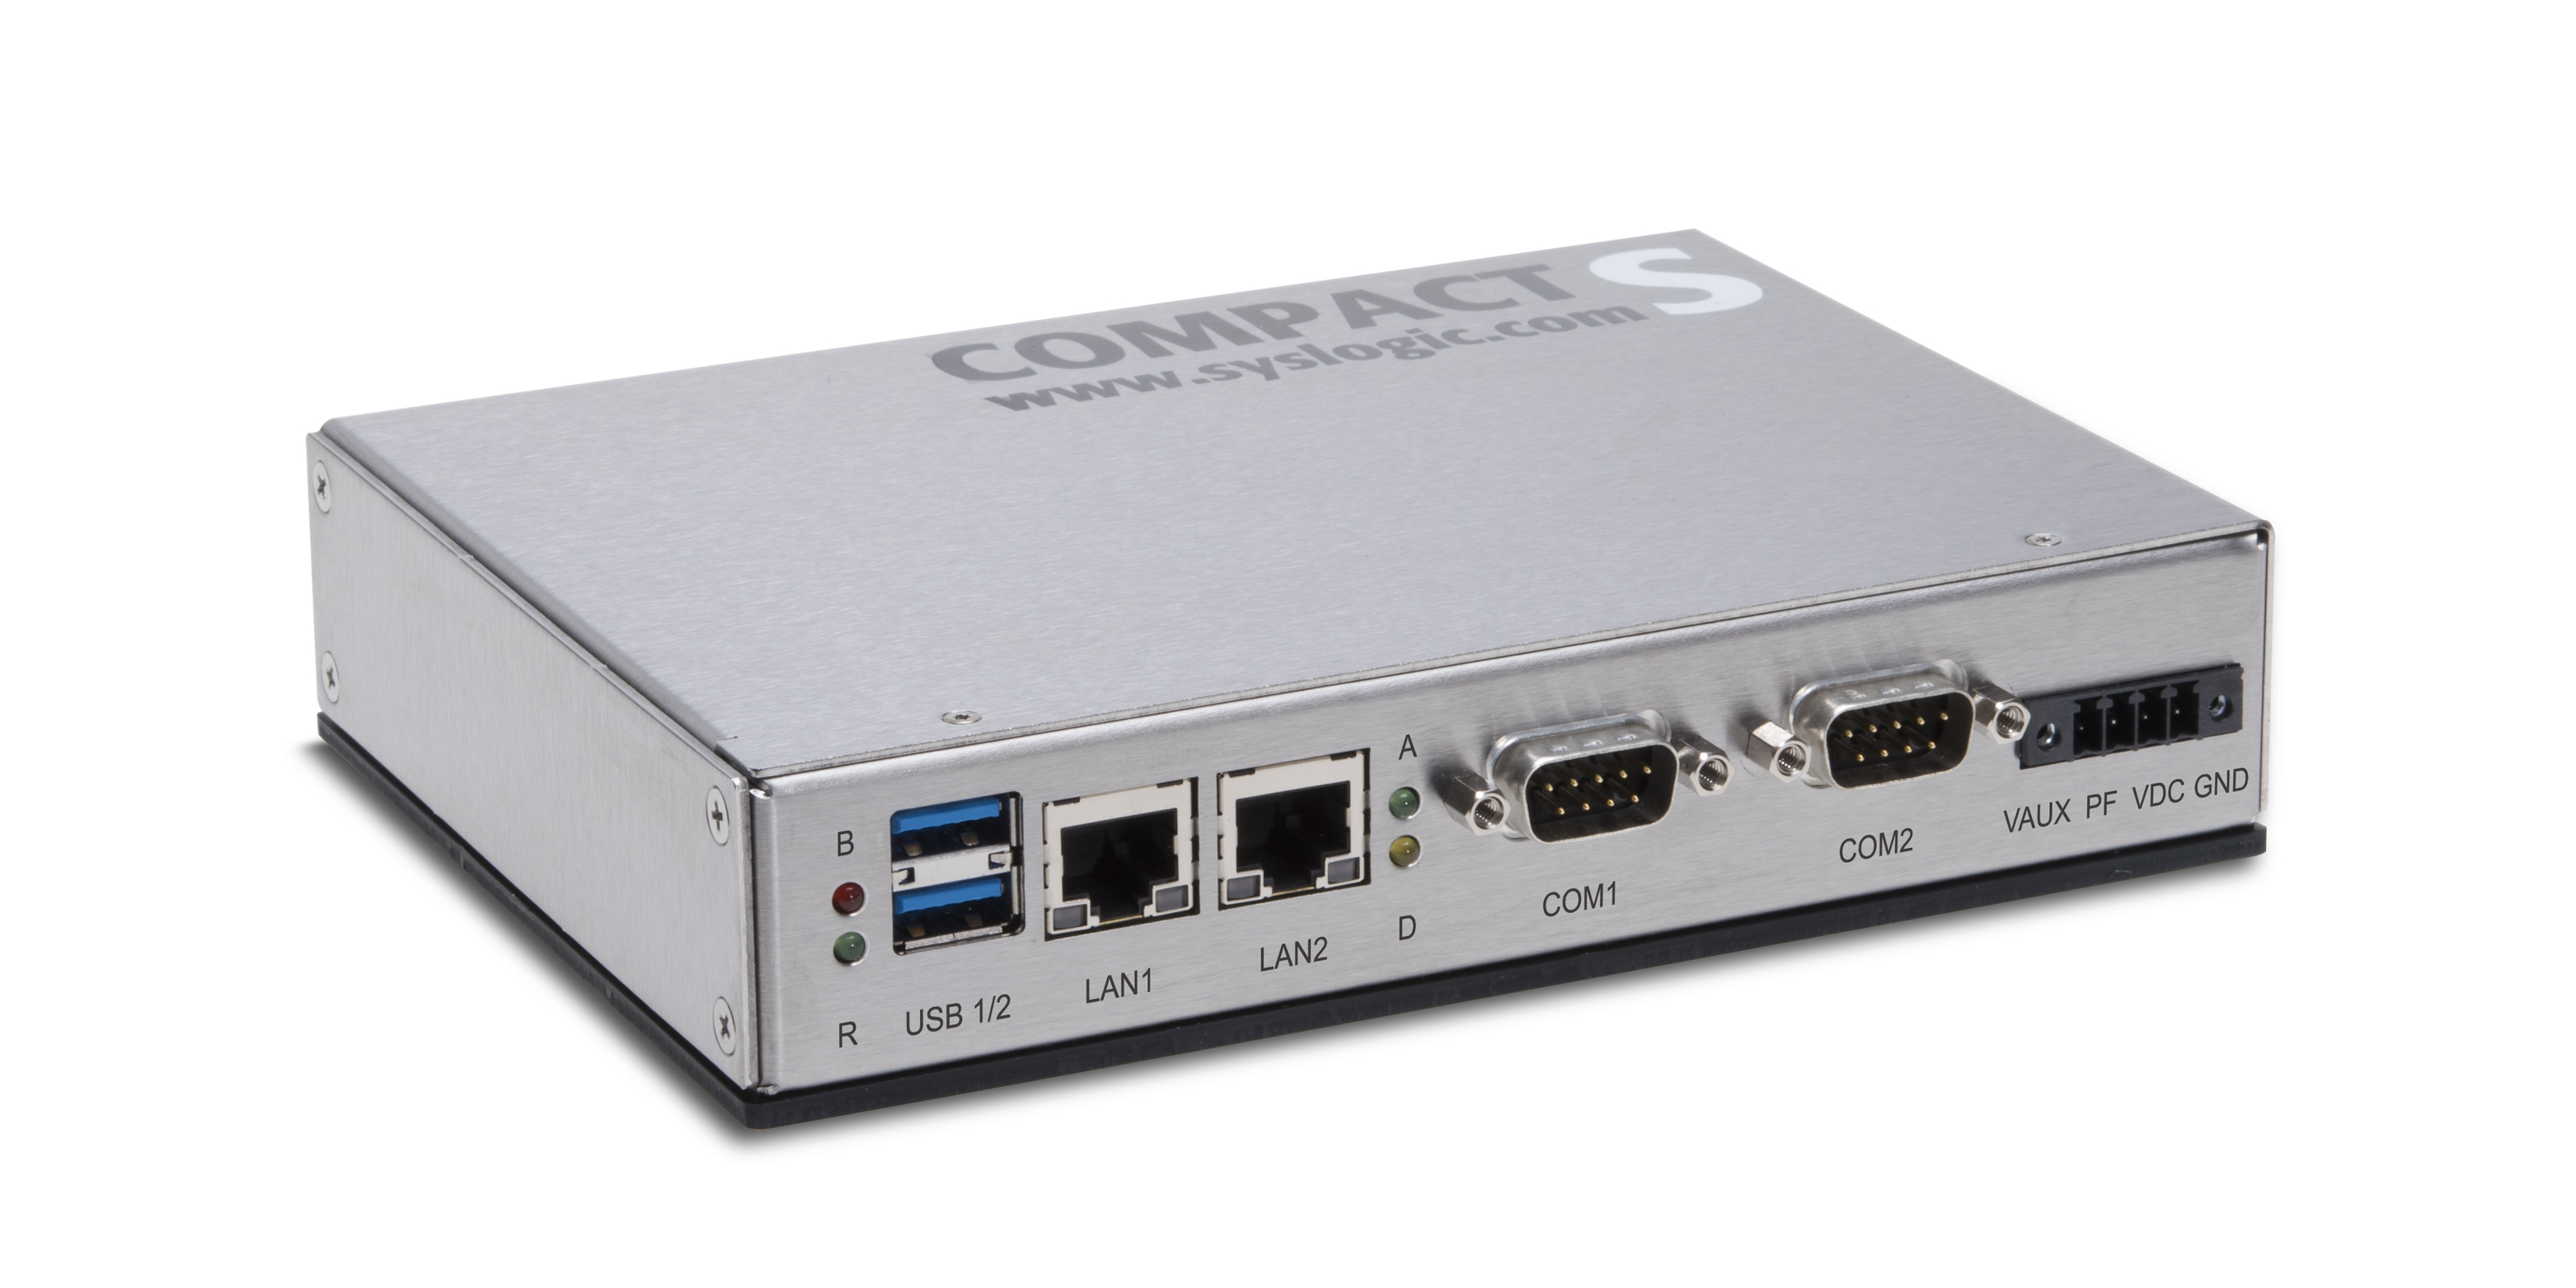 S - Embedded Box PC COMPACT8 Syslogic